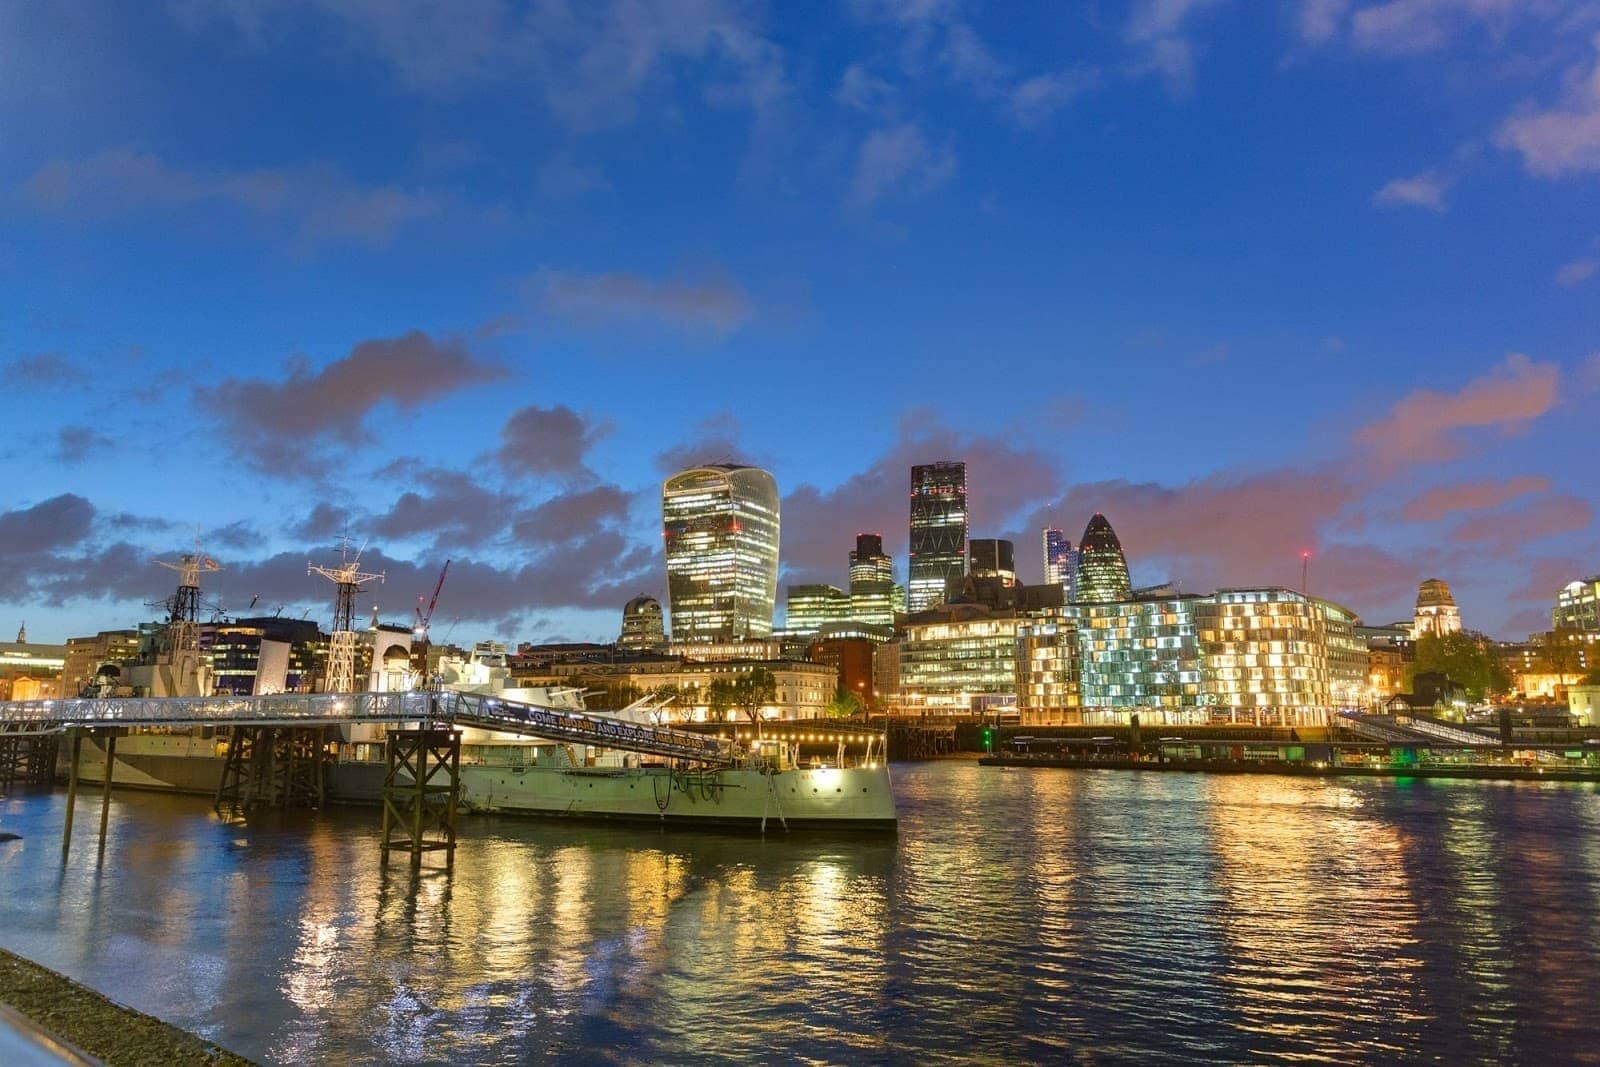 HMS Belfast and the city of London at night 2